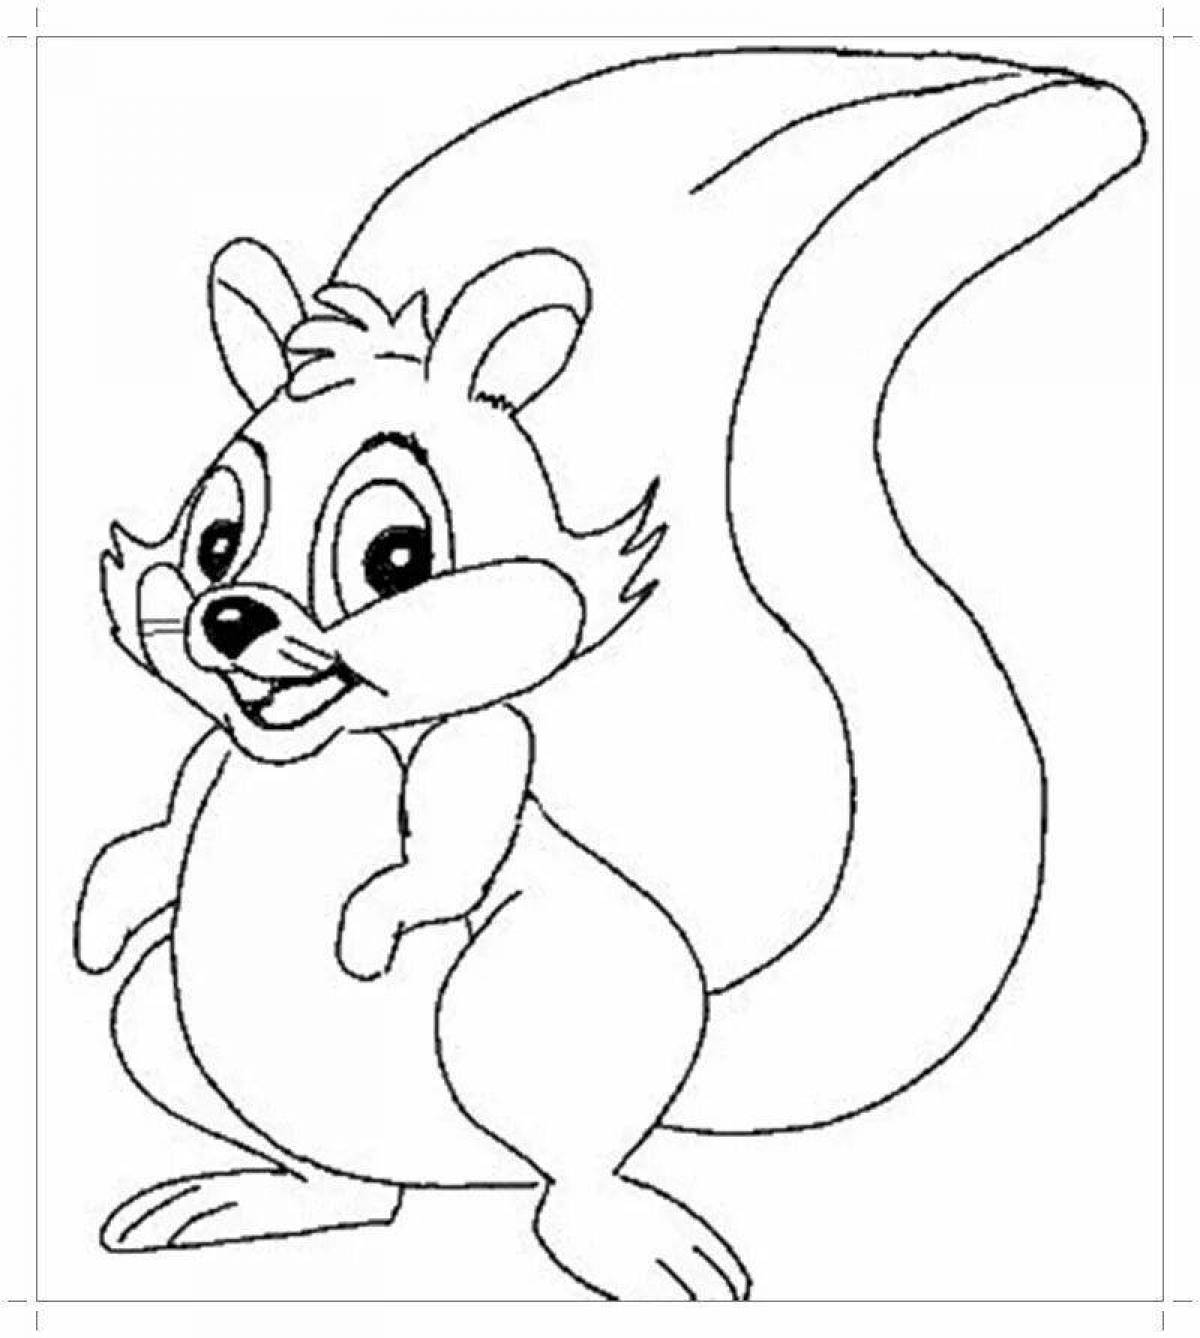 Happy squirrel coloring for kids